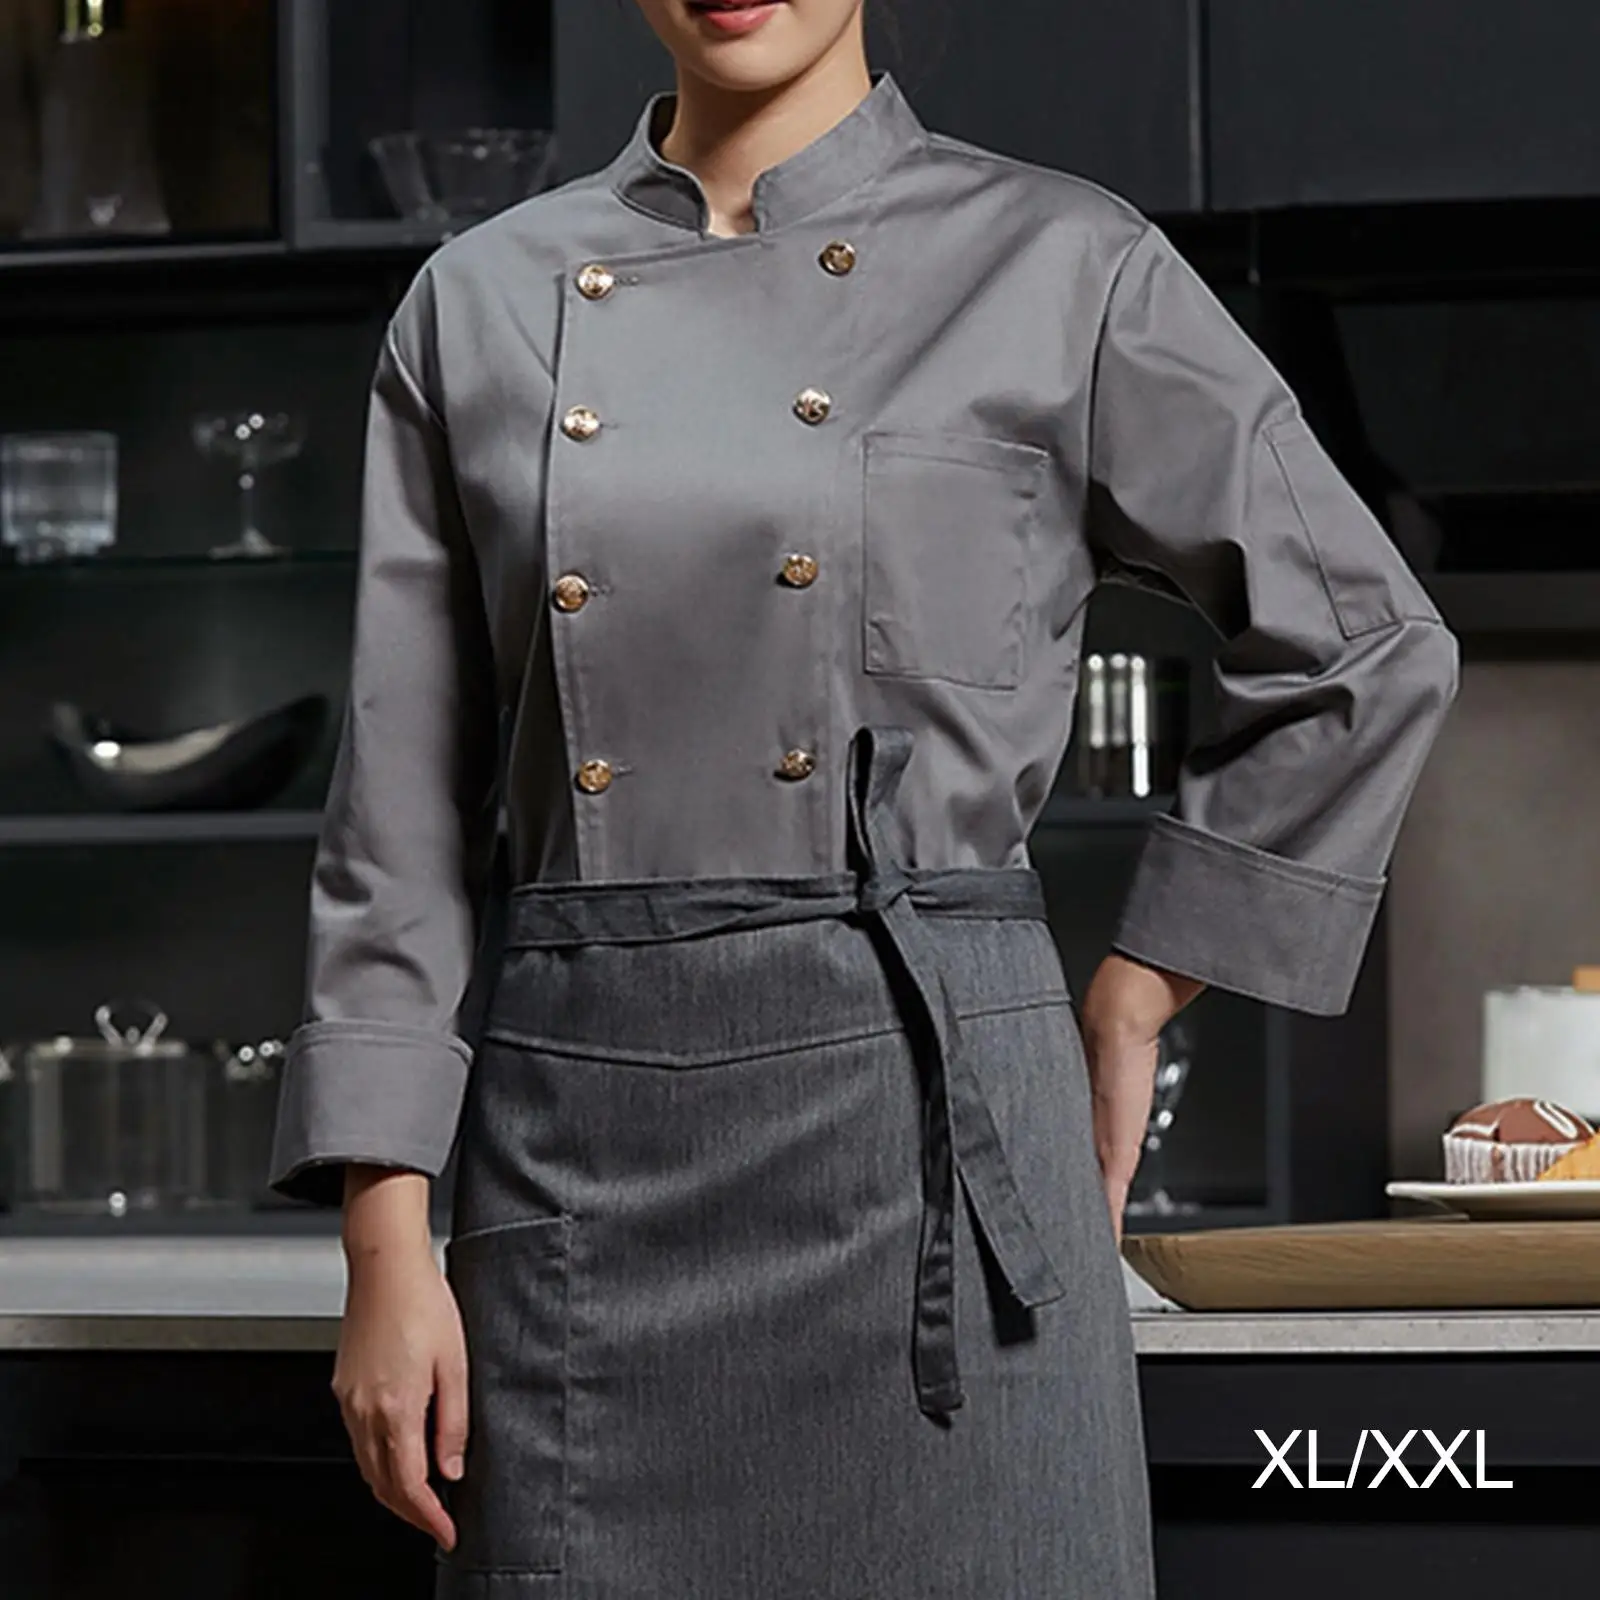 Chef Jacket Folded Cuffs Overalls Clothes Men Wear Resistant Soft Gray Chef Coat for Kitchen Food Industry Buffet Pub